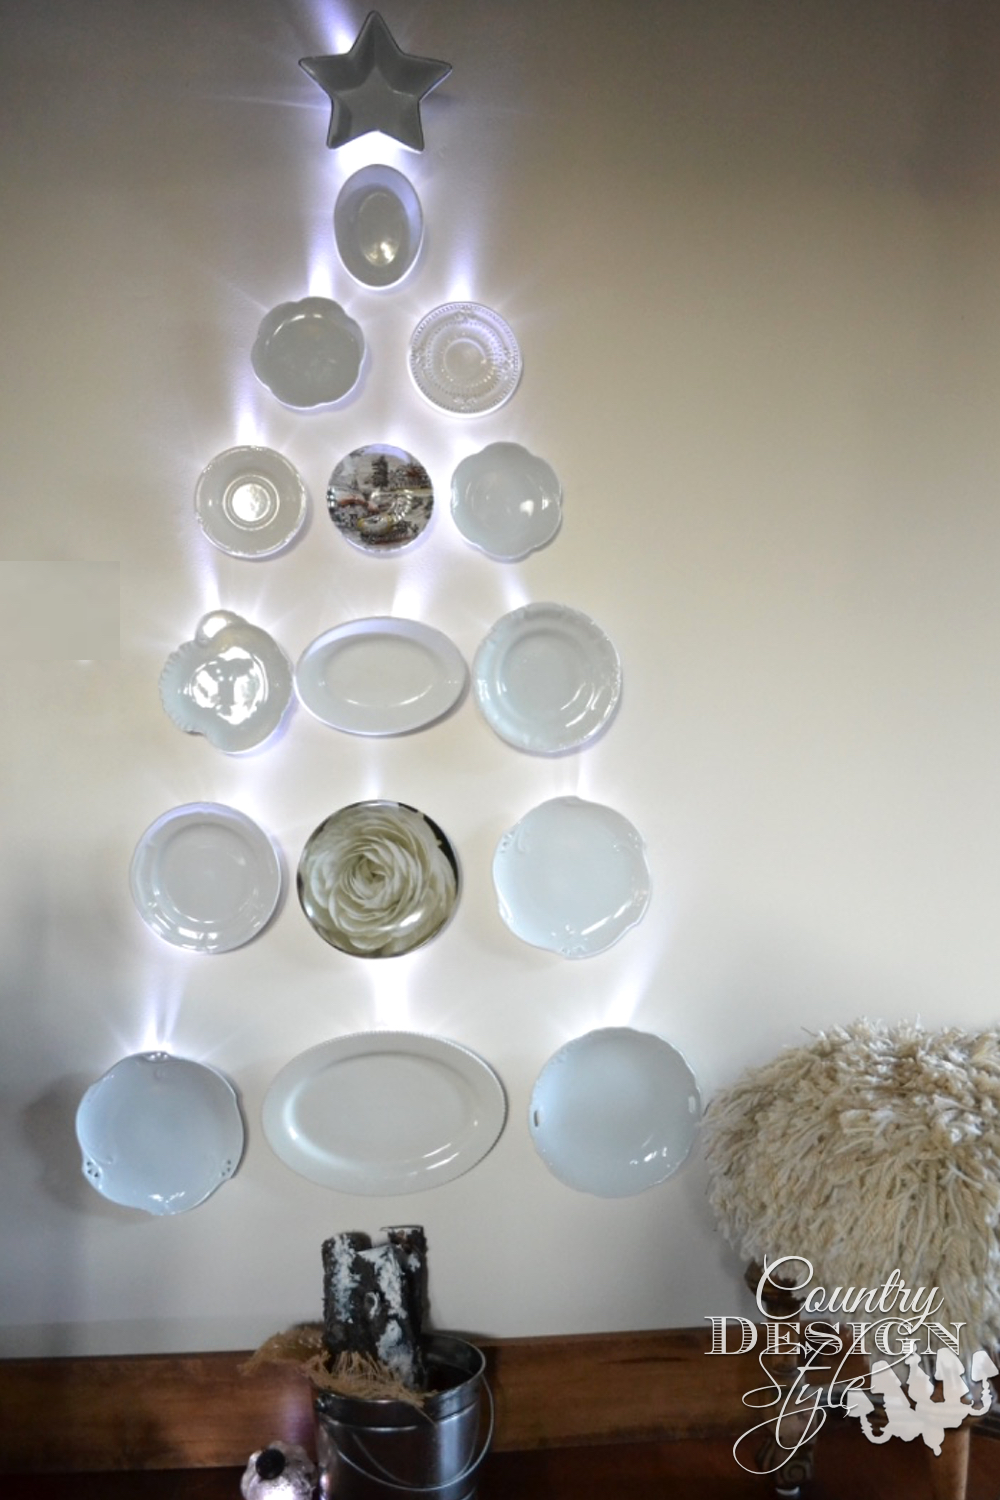 dish-christmas-tree-country-design-style-countrydesignstyle-com_